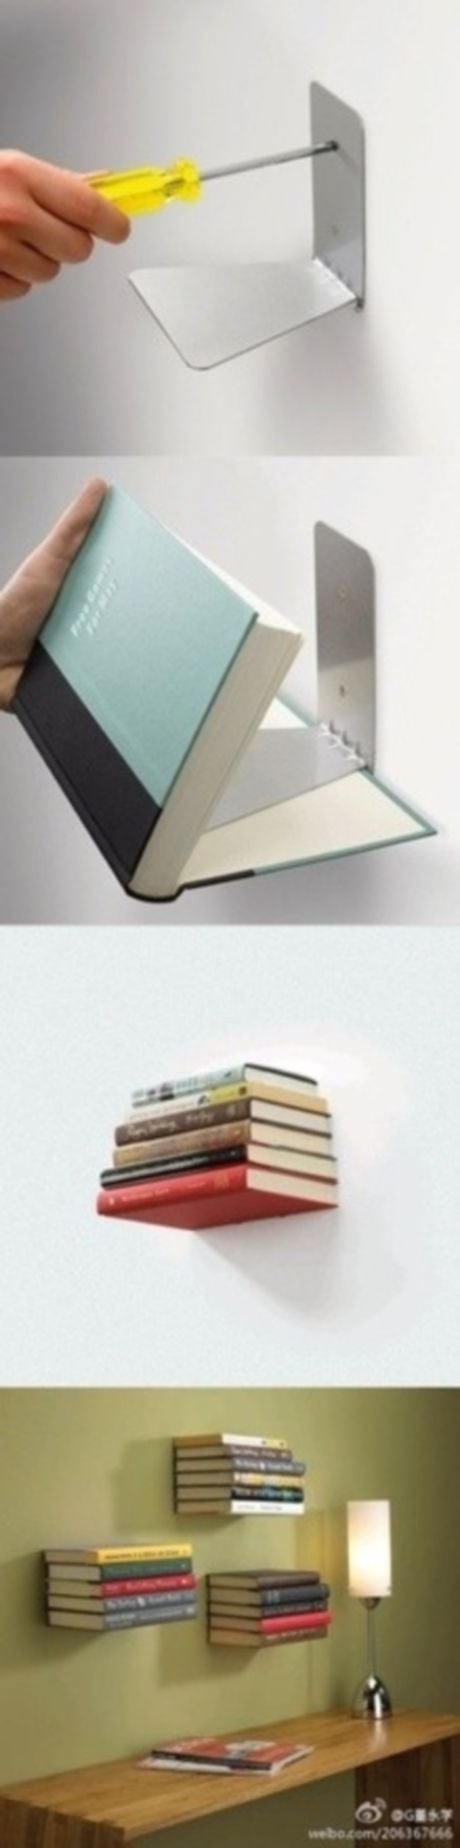 Top 40 DIY Projects Gadgets And Ideas For Your Home-homesthetics.net (5)